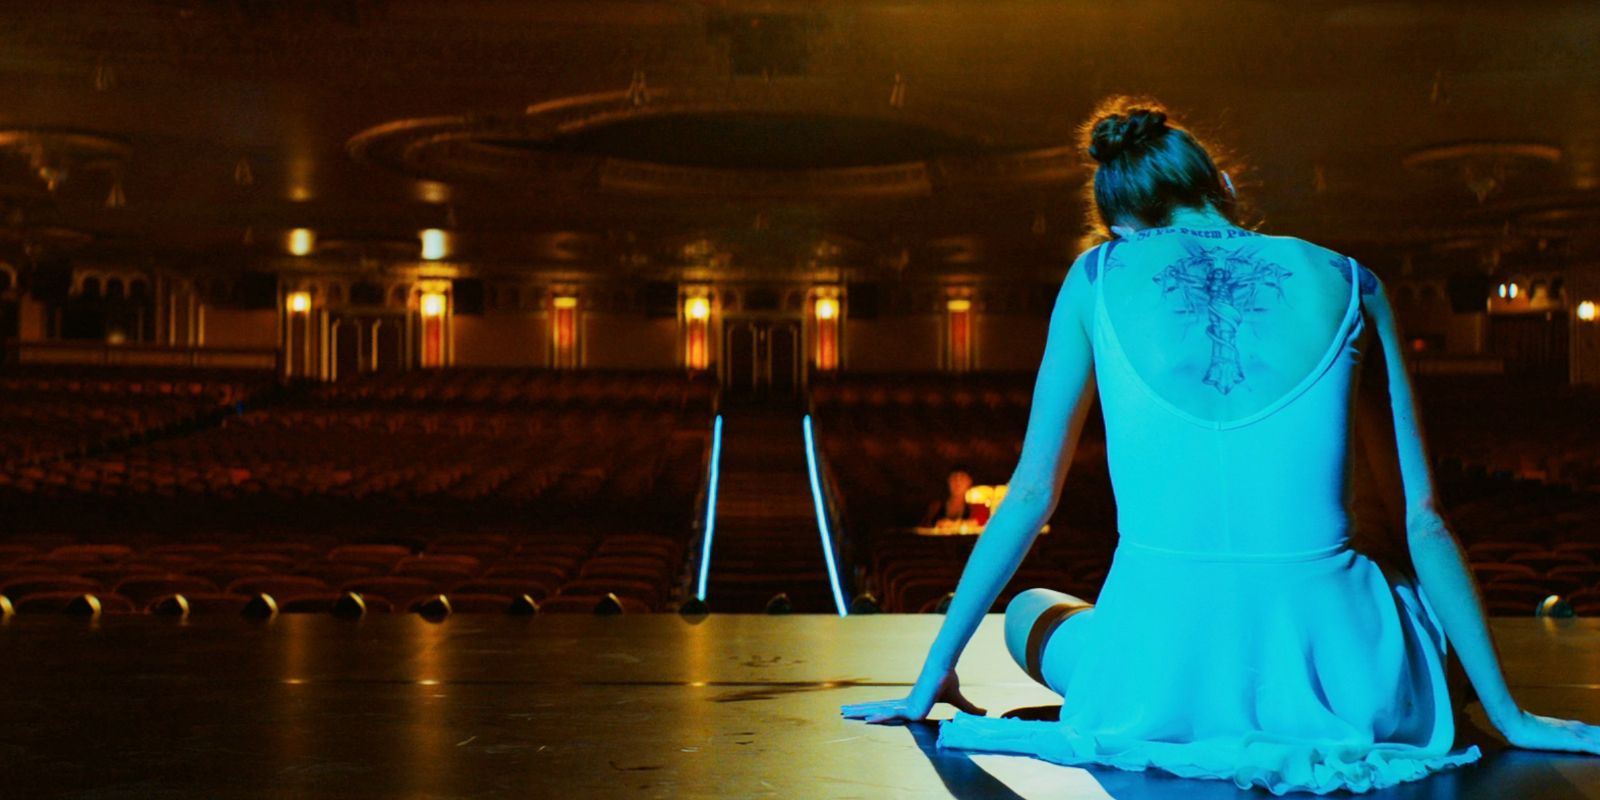 Rooney the ballerina in sitting on a stage in John Wick: Chapter 3